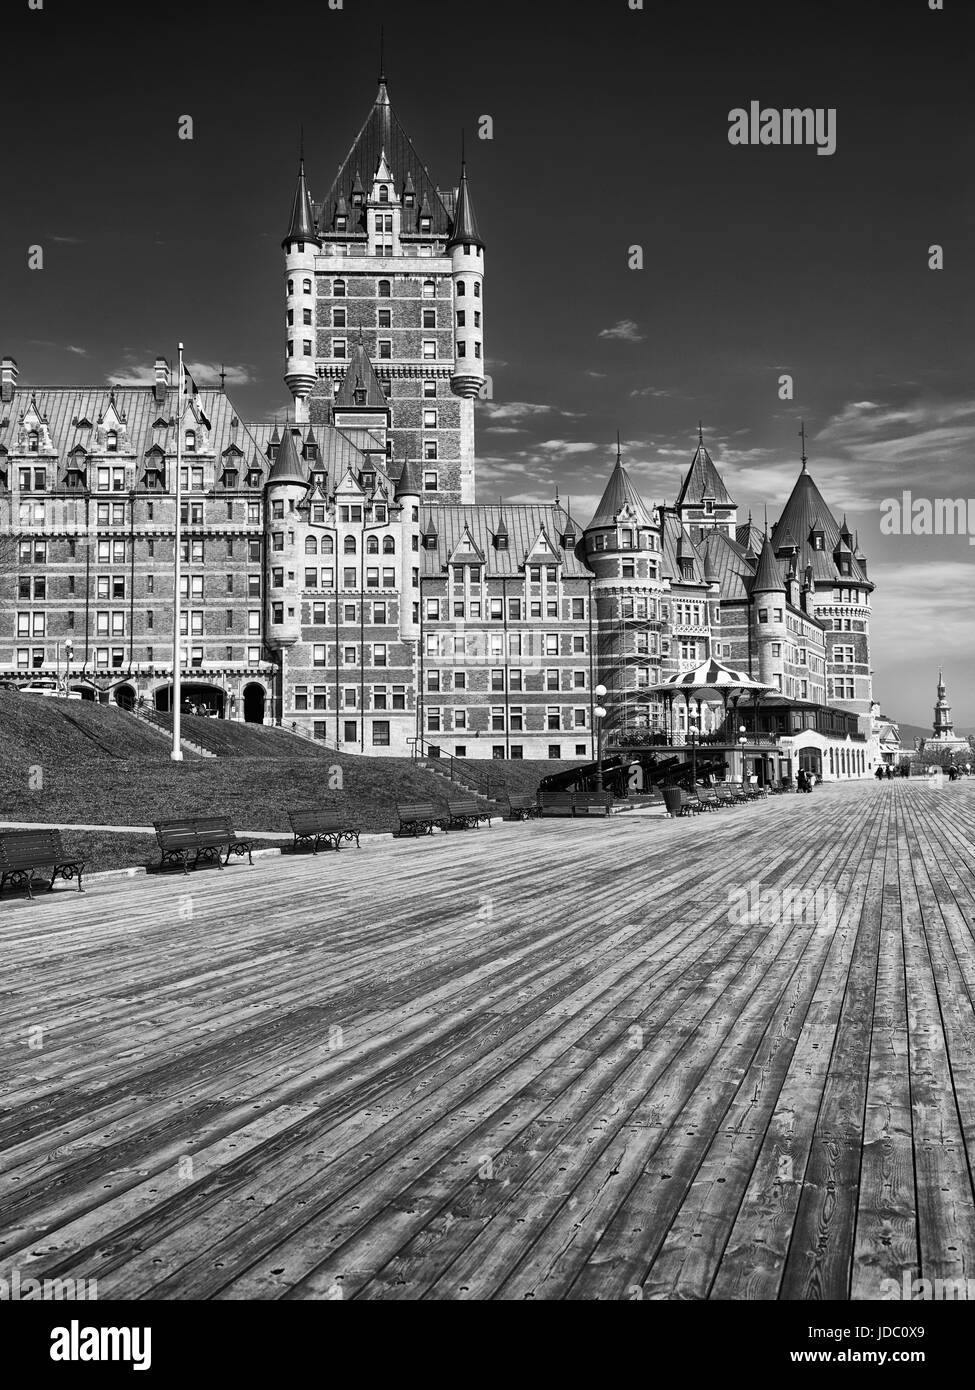 License available at MaximImages.com Fairmont Le Chateau Frontenac castle luxury grand hotel Old Quebec city, Canada Stock Photo